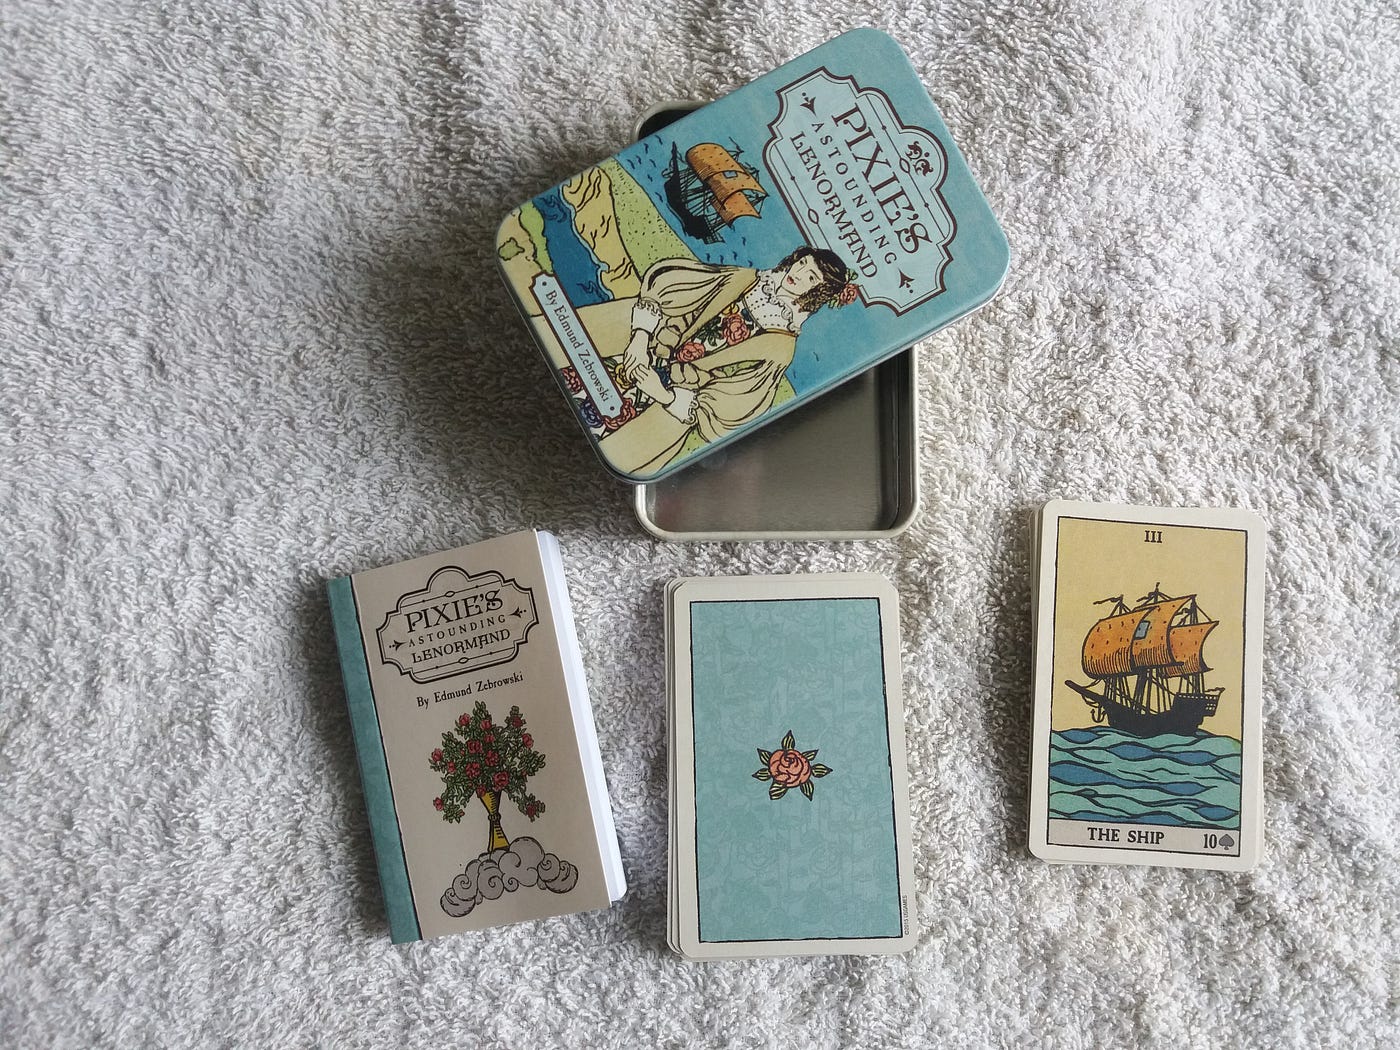 A Review of “Pixie's Astounding Lenormand” by Edmund Zebrowski | Medium